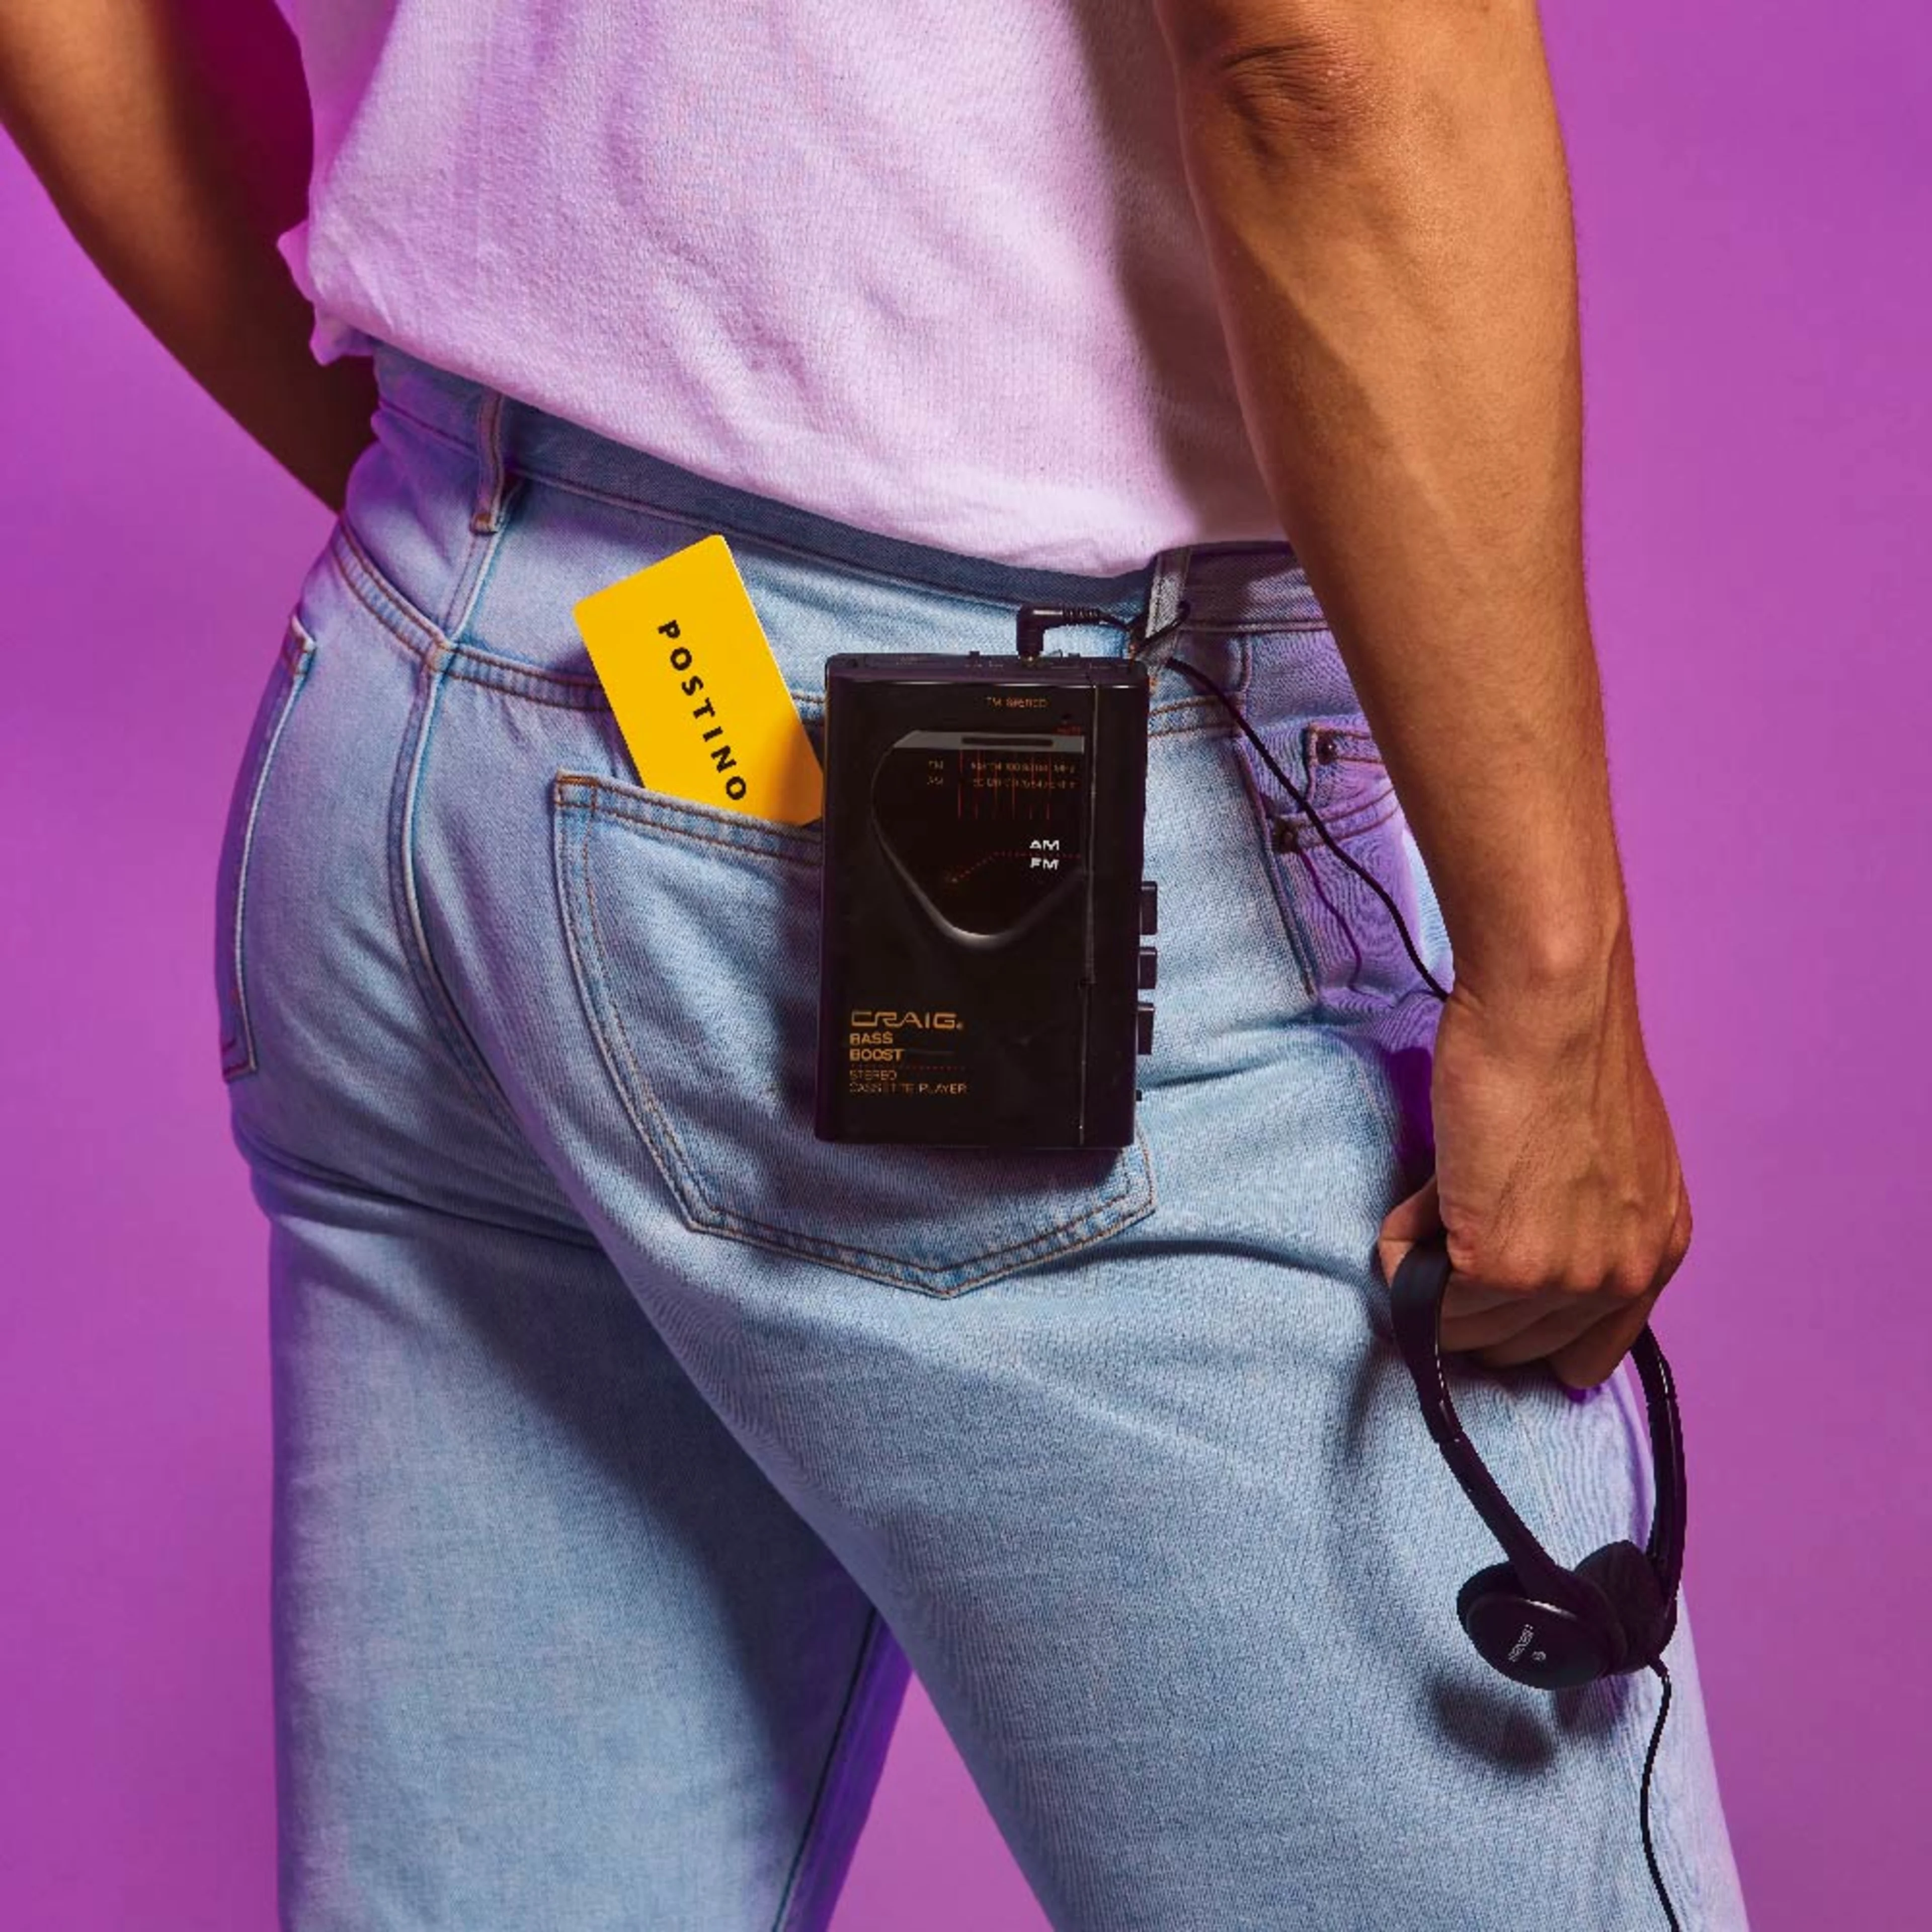 Postino gift card sticking out of a man's back pocket